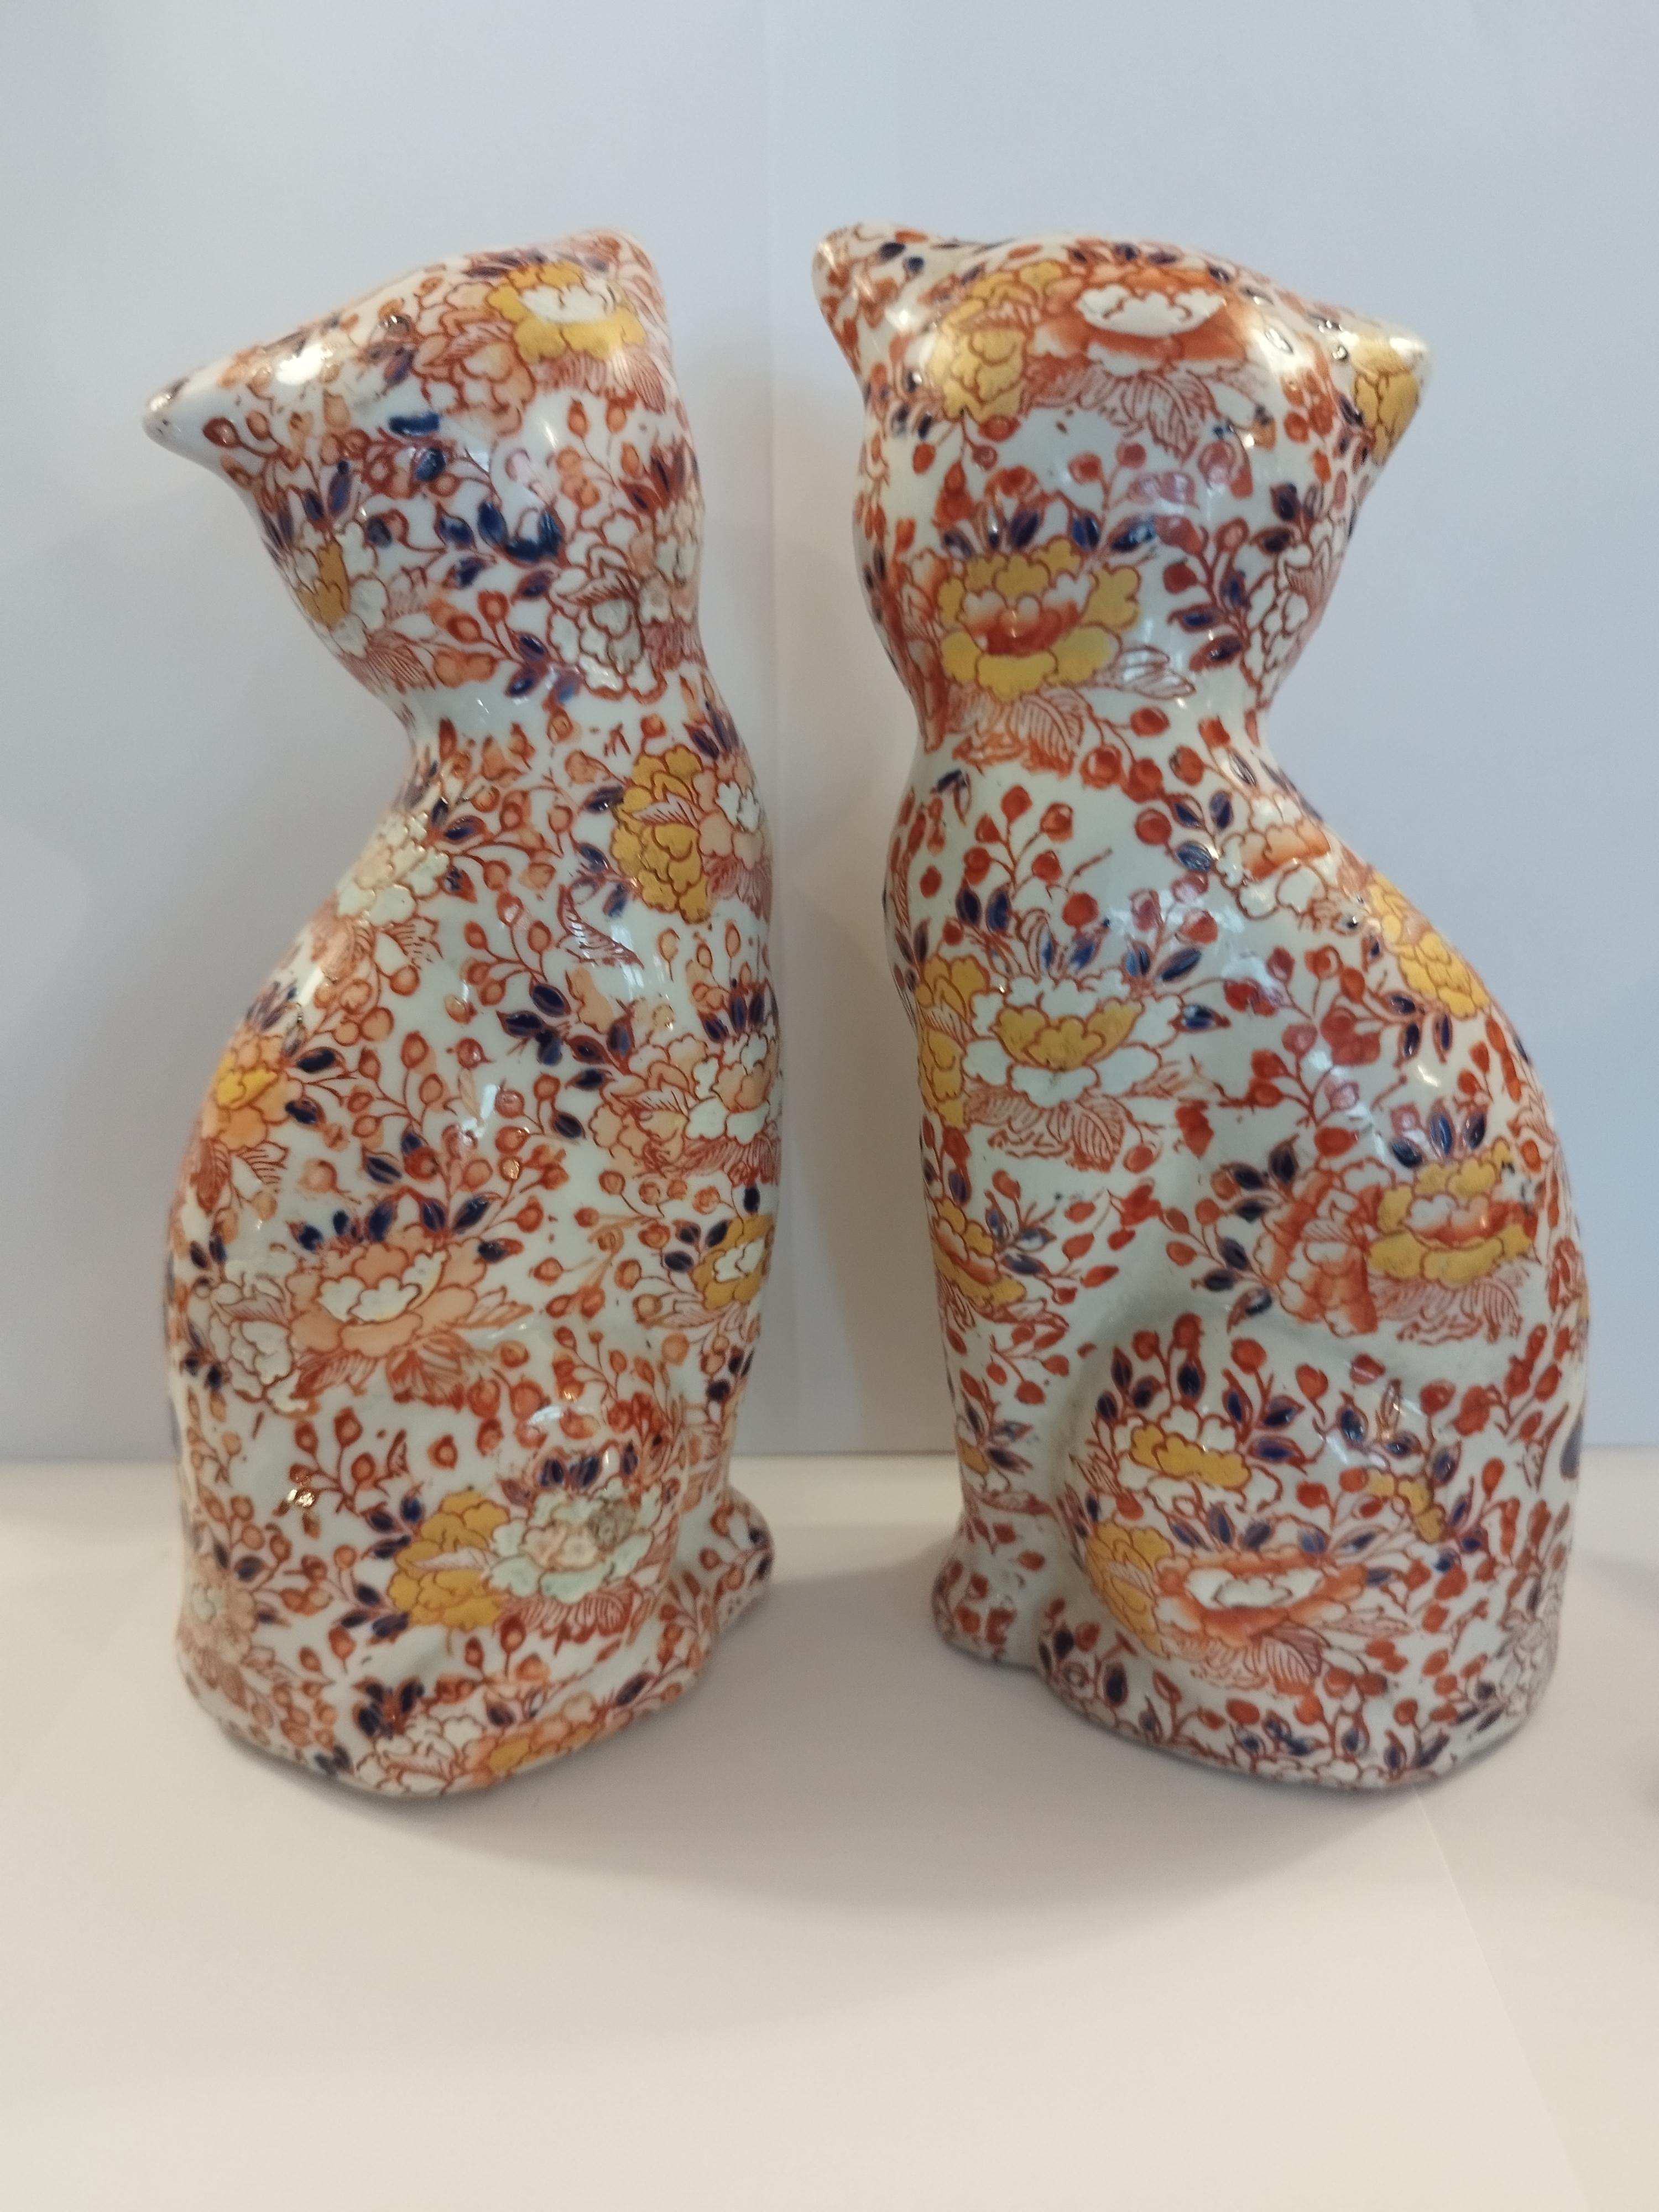 A pair of japanese lovable imari cats in red enameled porcelain.
Each sculpture okimono is signed on the base.
Imari red enamels over blue, yelow and some green under glazing.

Early 20th century
In very good condition.